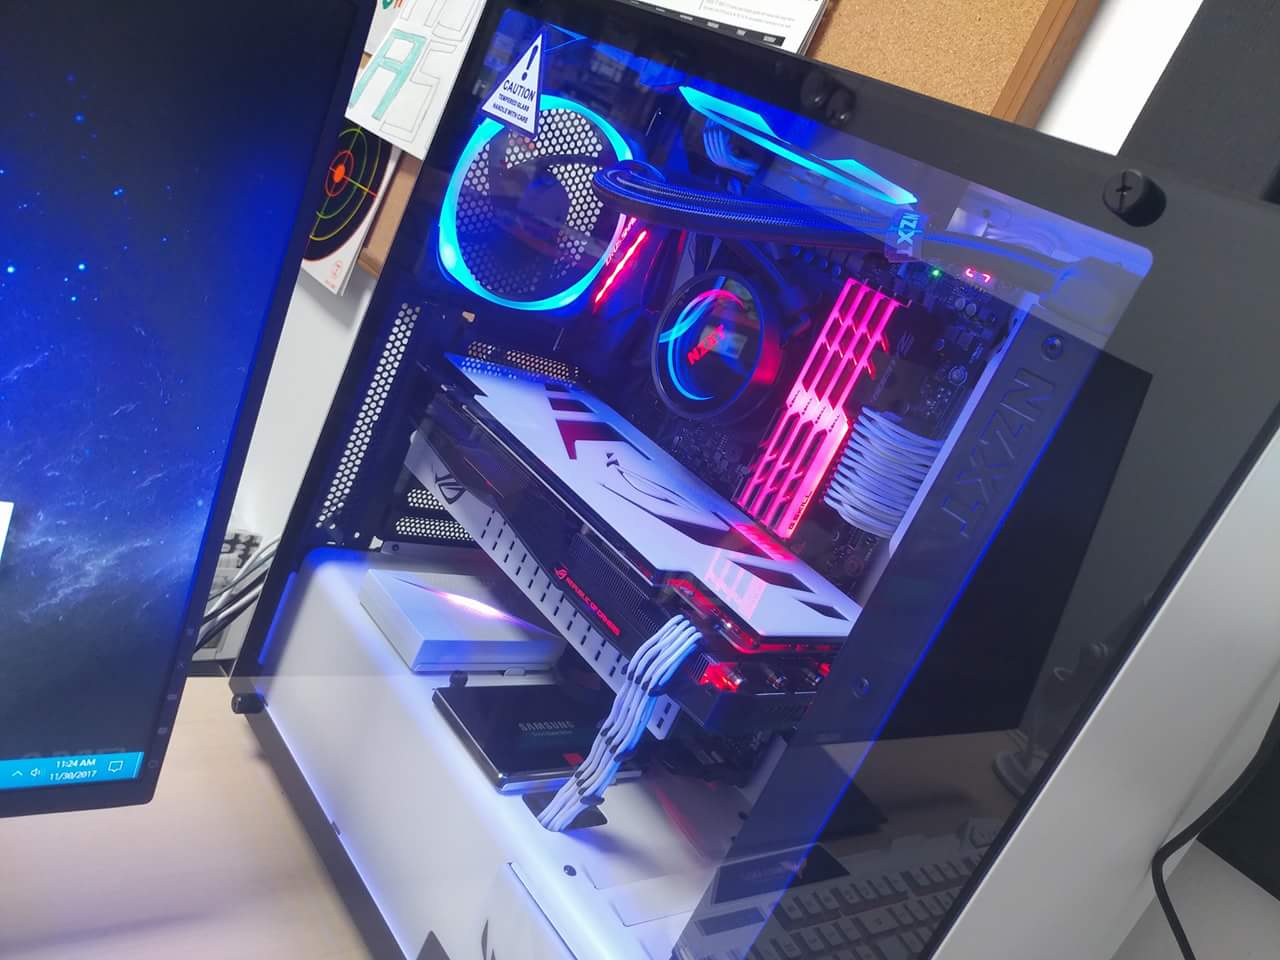 V1 Tech on Twitter: "Beautiful @NZXT S340 Elite build by Nick Santiago  featuring custom backplate, gpu support bracket, and SSD covers from our  shop! Today is the last day of our Cyber